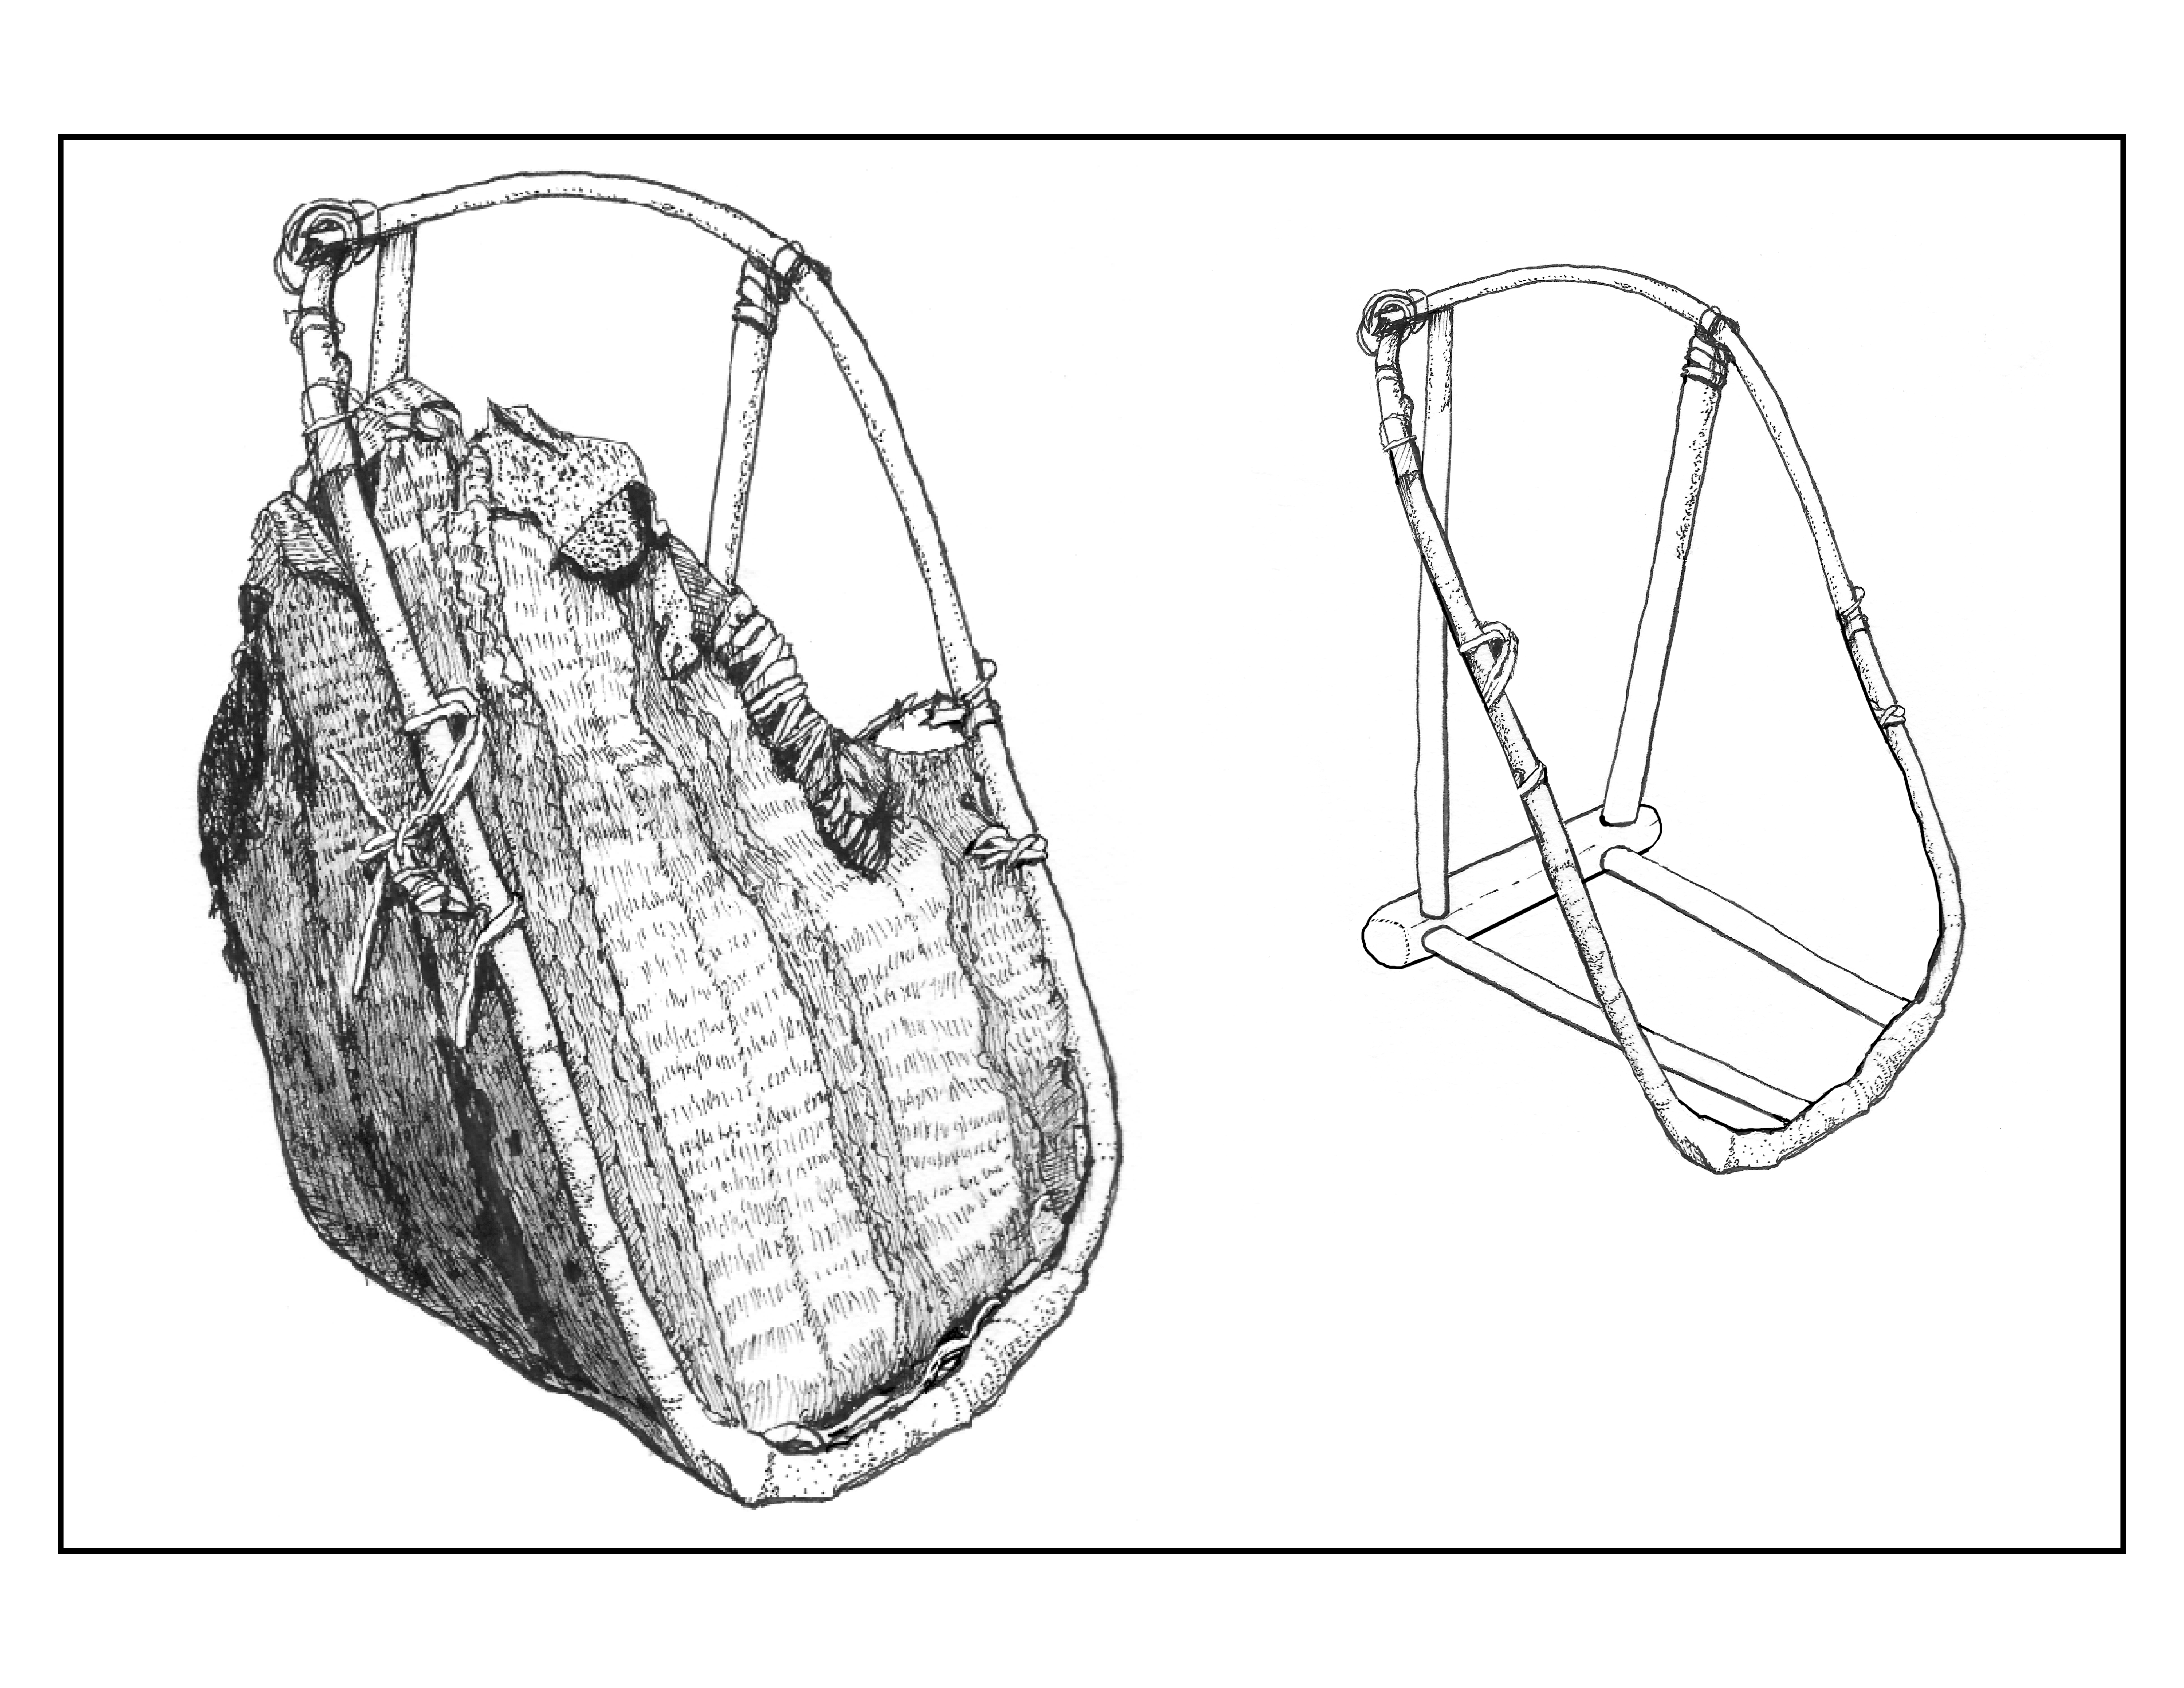 This illustration depicts the cradle with woven rye grass and also its internal frame